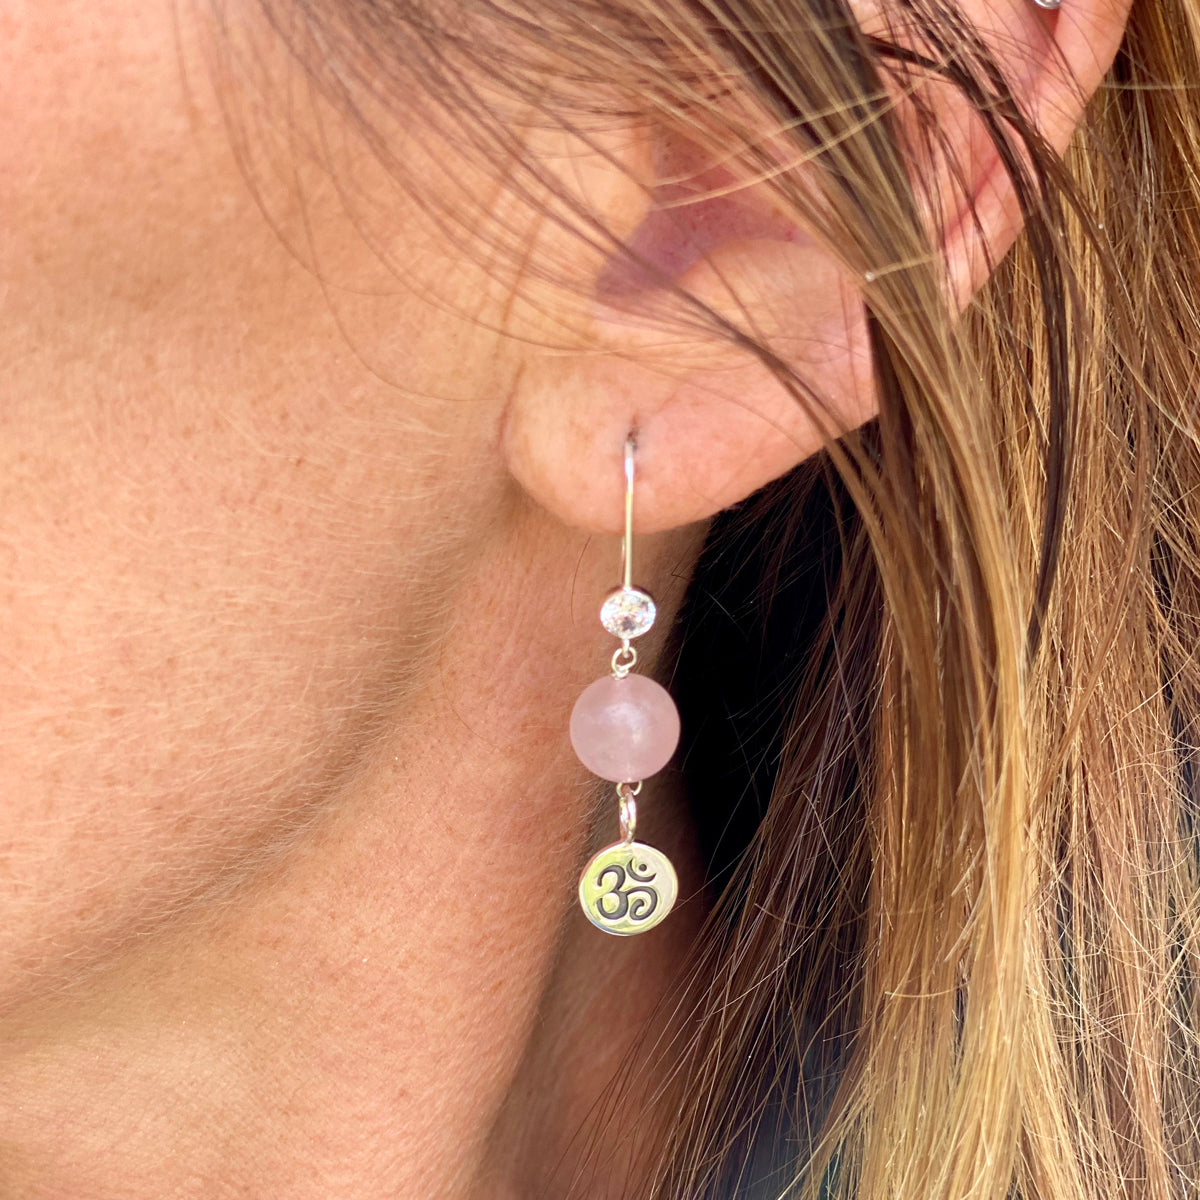 Sterling Silver Yoga Inspired Ohm Earrings with Rose Quartz to Hear the Sound of the Universe